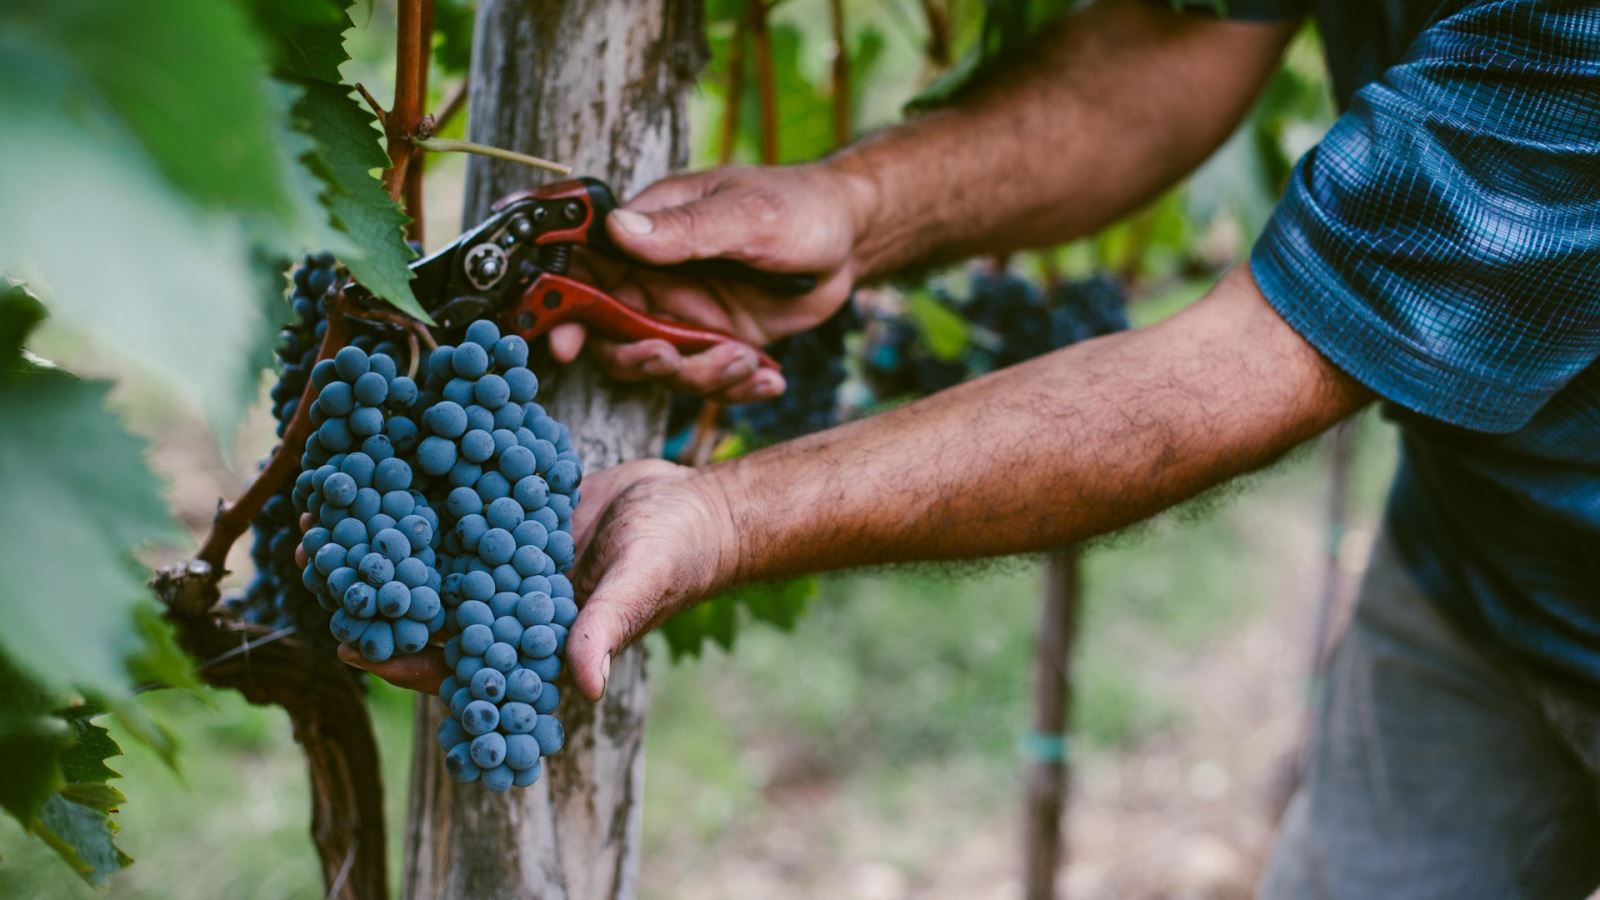 Grapes are cut from the vines by hand. Photo: Cultura Creative (RF)/Alamy